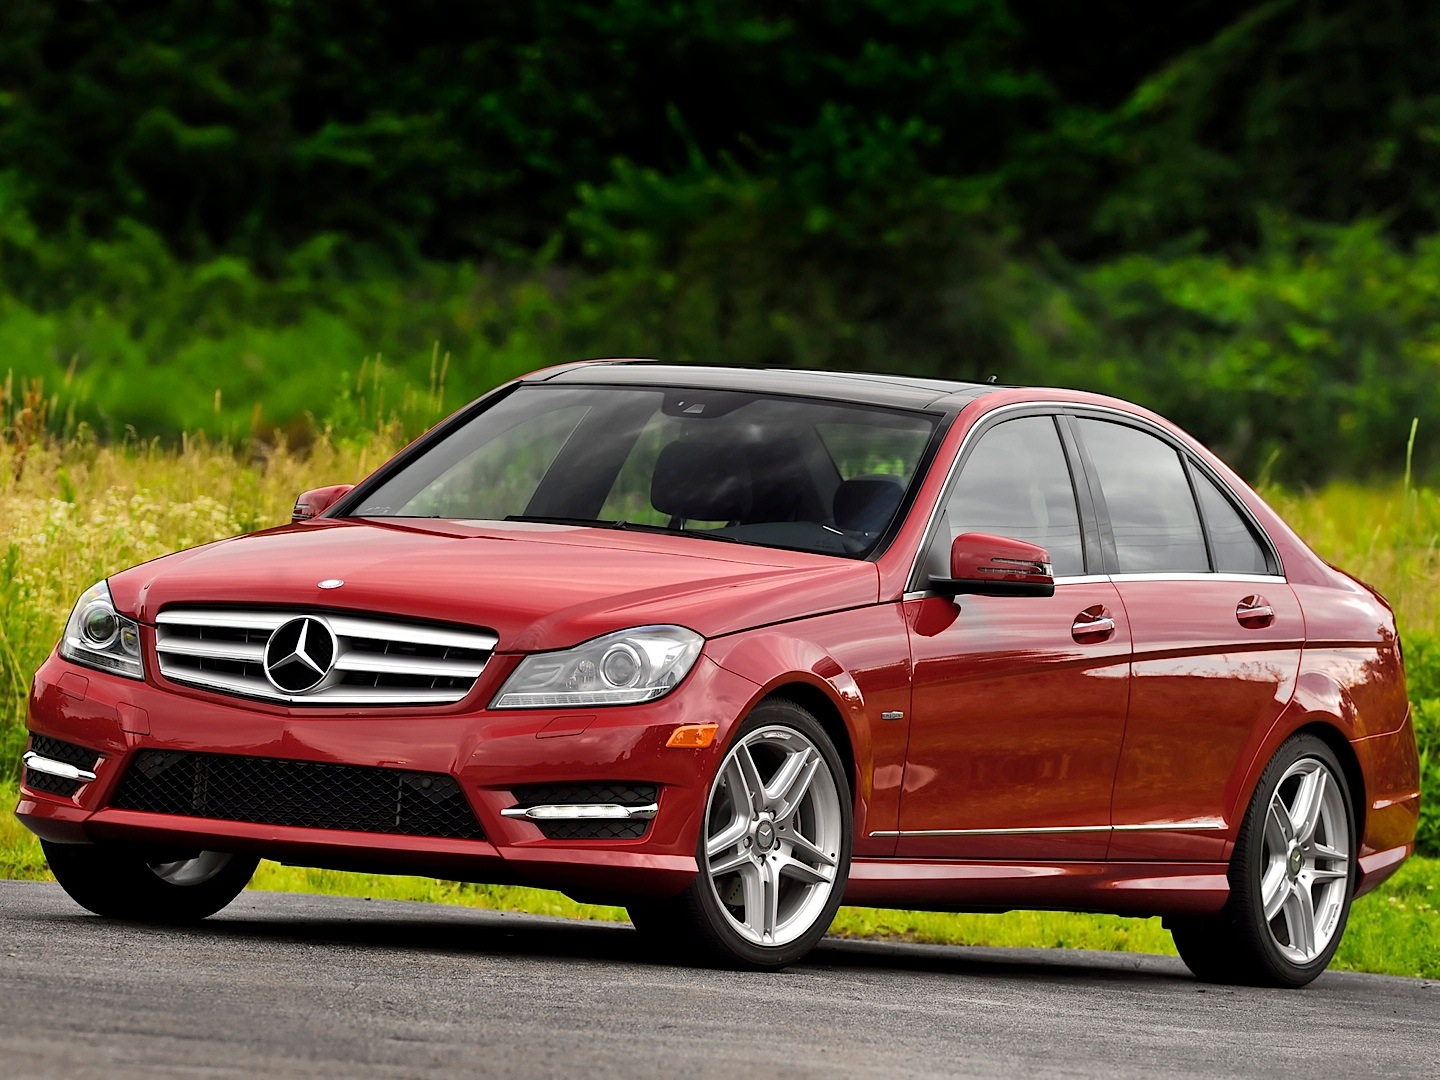 W204 CClass is The Second Best Sold Premium Sedan in The